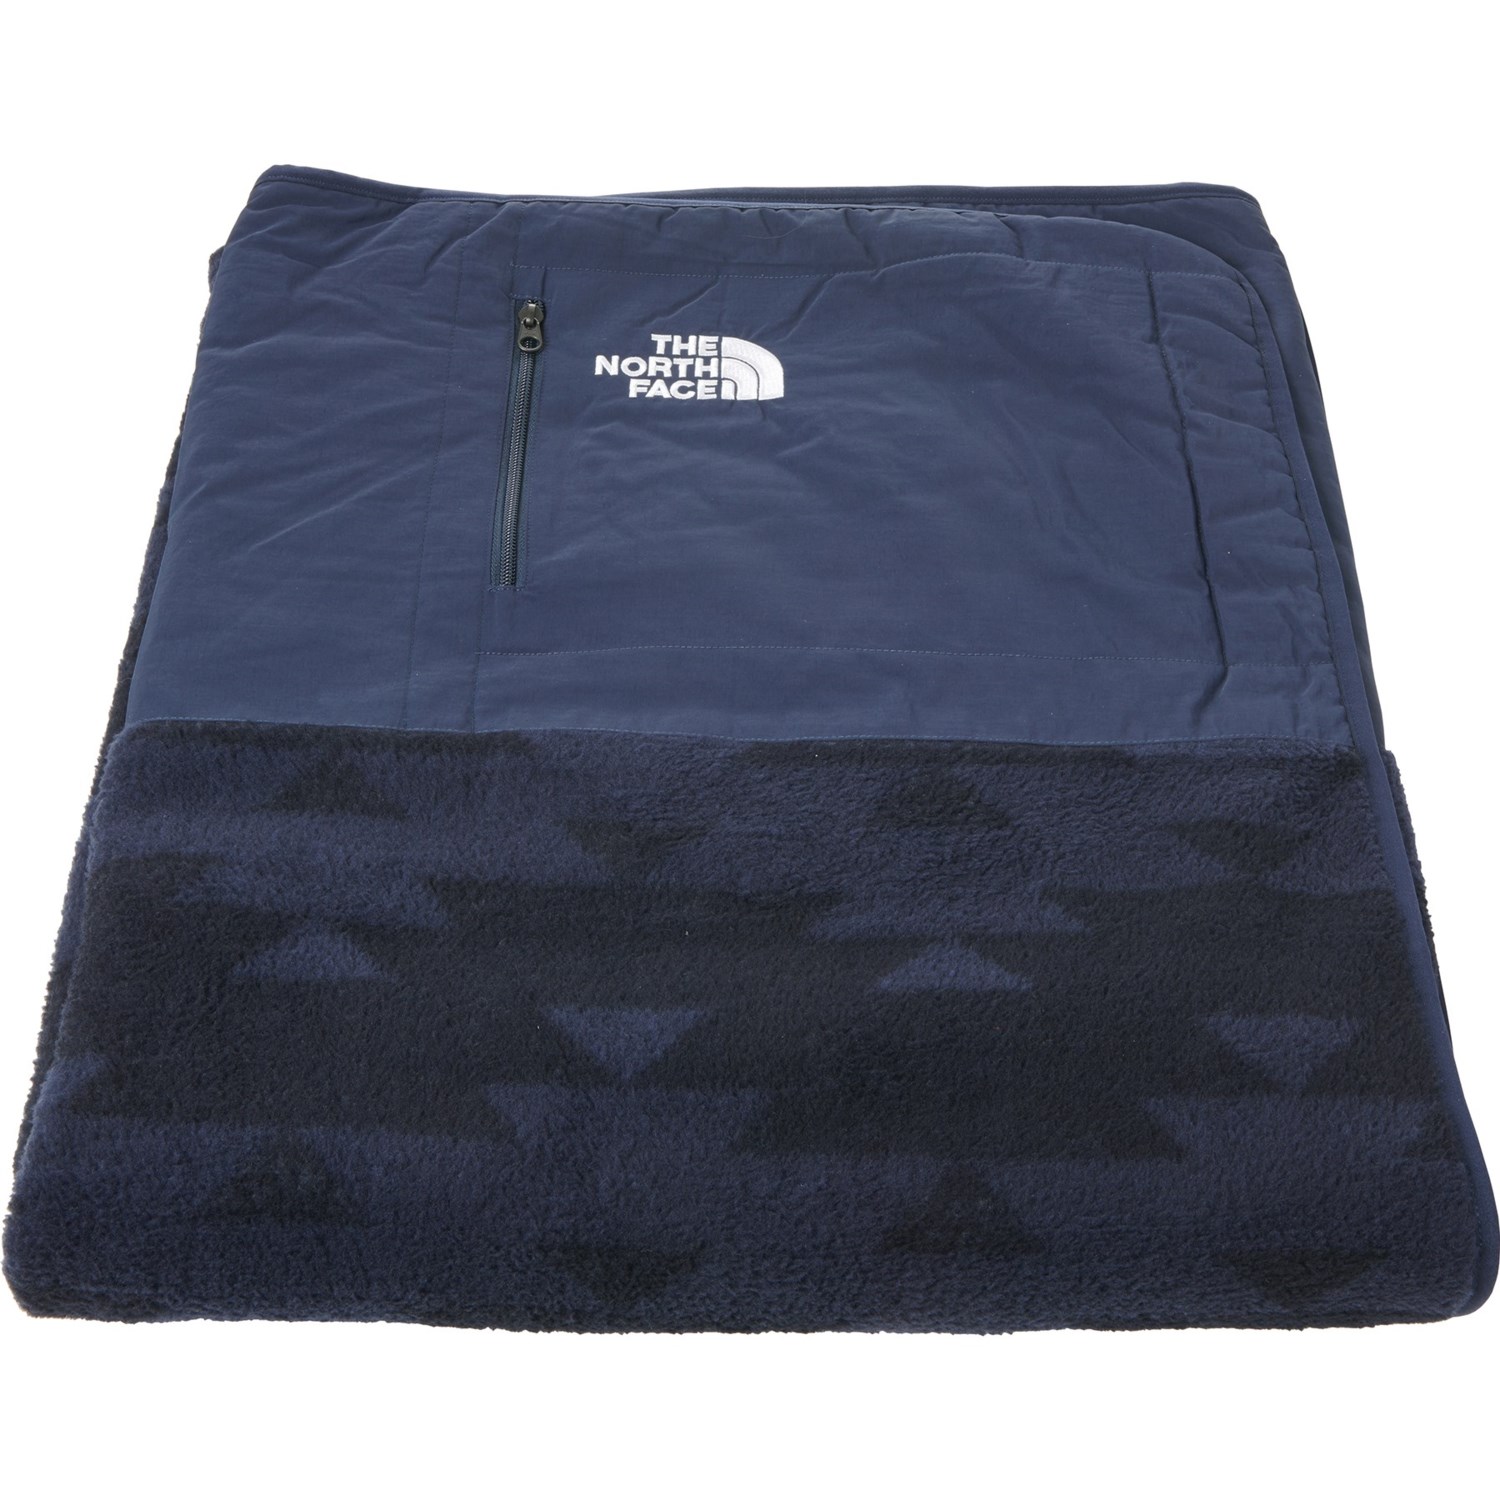 north face blanket